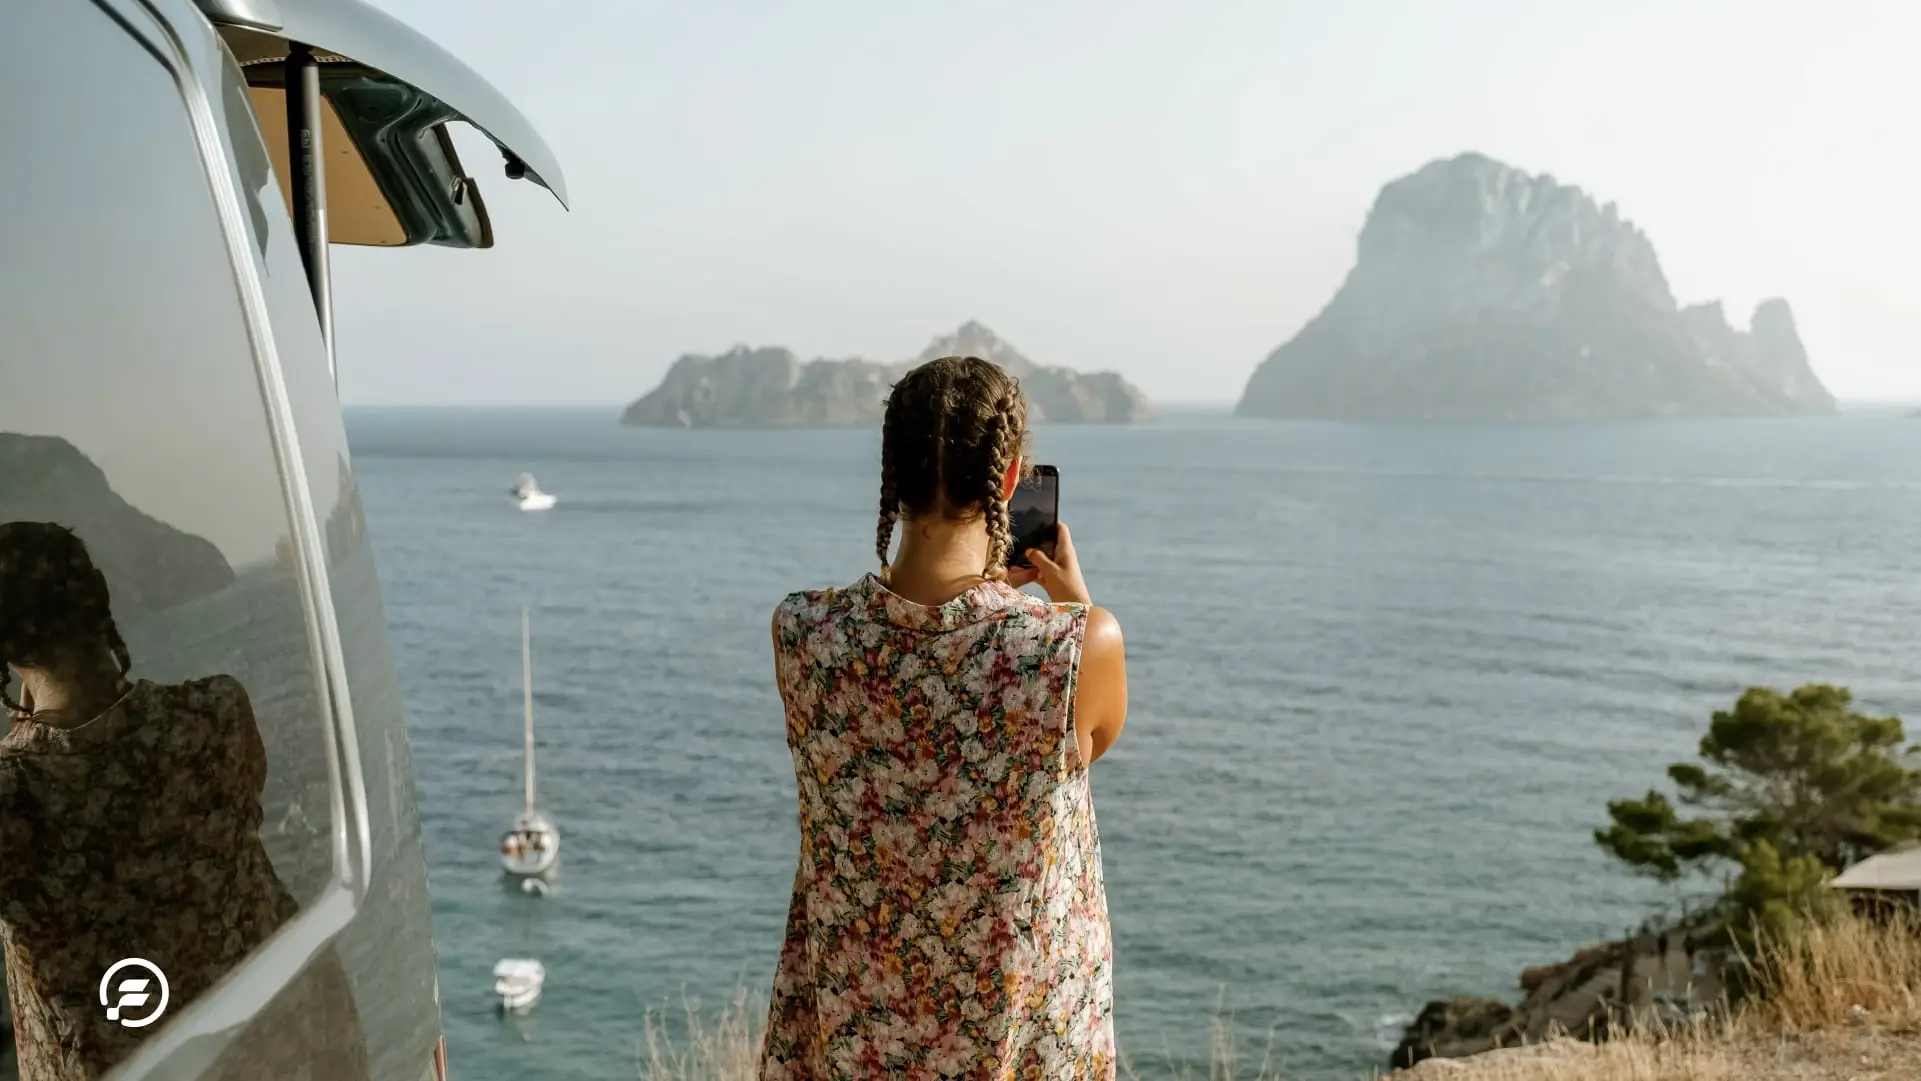 A digital nomad viewing the ocean and taking a picture